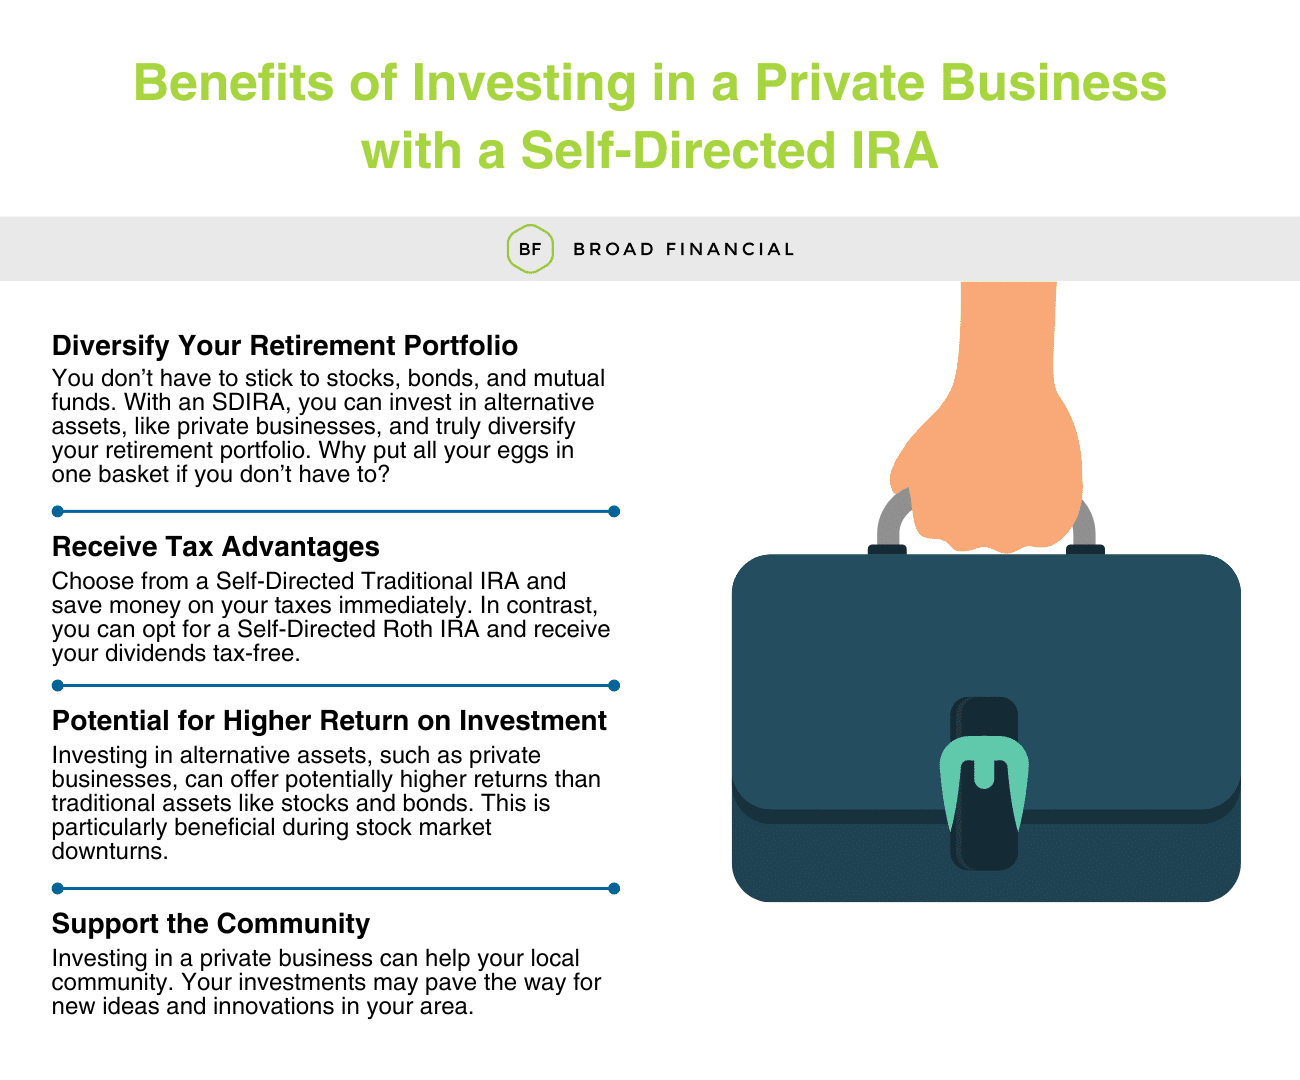 Benefits of Investing in a Private Business with a Self-Directed IRA Infographic: (1) Diversify Your Retirement Portfolio - You don’t have to stick to stocks, bonds, and mutual funds. With an SDIRA, you can invest in alternative assets, like private businesses and truly diversify your retirement portfolio. Why put all your eggs in one basket if you don’t have to? (2) Receive Tax Advantages -
Choose from a Self-Directed Traditional IRA and save money on your taxes immediately. In contrast, you can opt for a Self-Directed Roth IRA and receive your dividends tax-free. (3) Potential for Higher Return on Investment - Investing in alternative assets, such as private businesses, can offer potentially higher returns than traditional assets like stocks and bonds. This is particularly beneficial during stock market downturns. (4) Support the Community - Investing in a private business can help your local community. Your investments may pave the way for new ideas and innovations in your area.